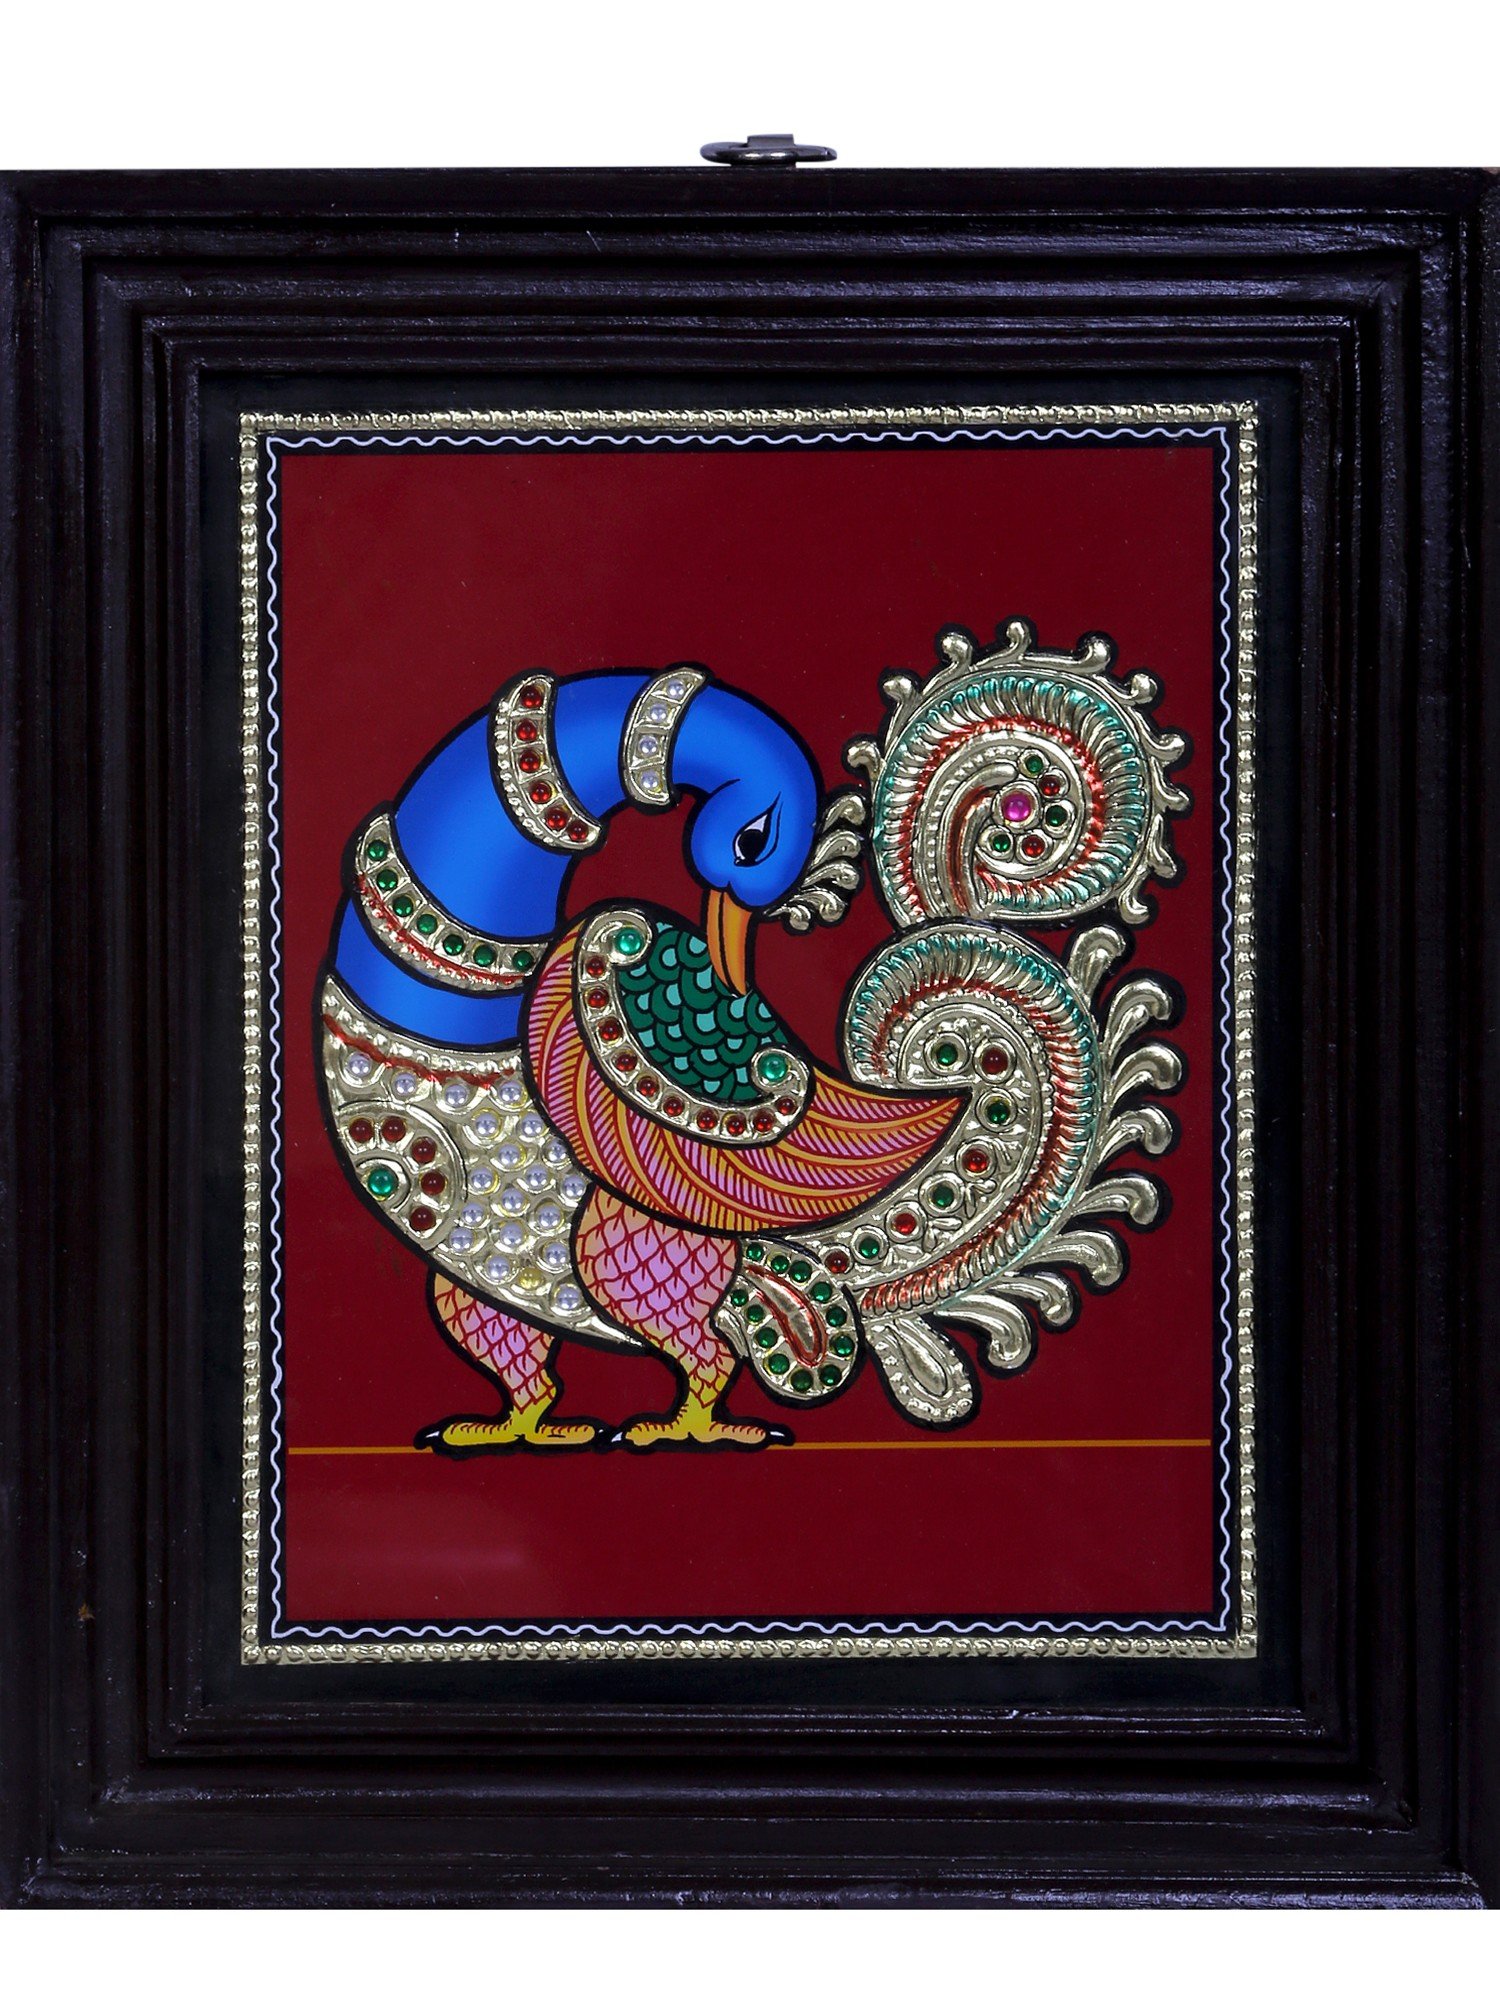 Tanjore Painting Tanjavur Paintings history artists style